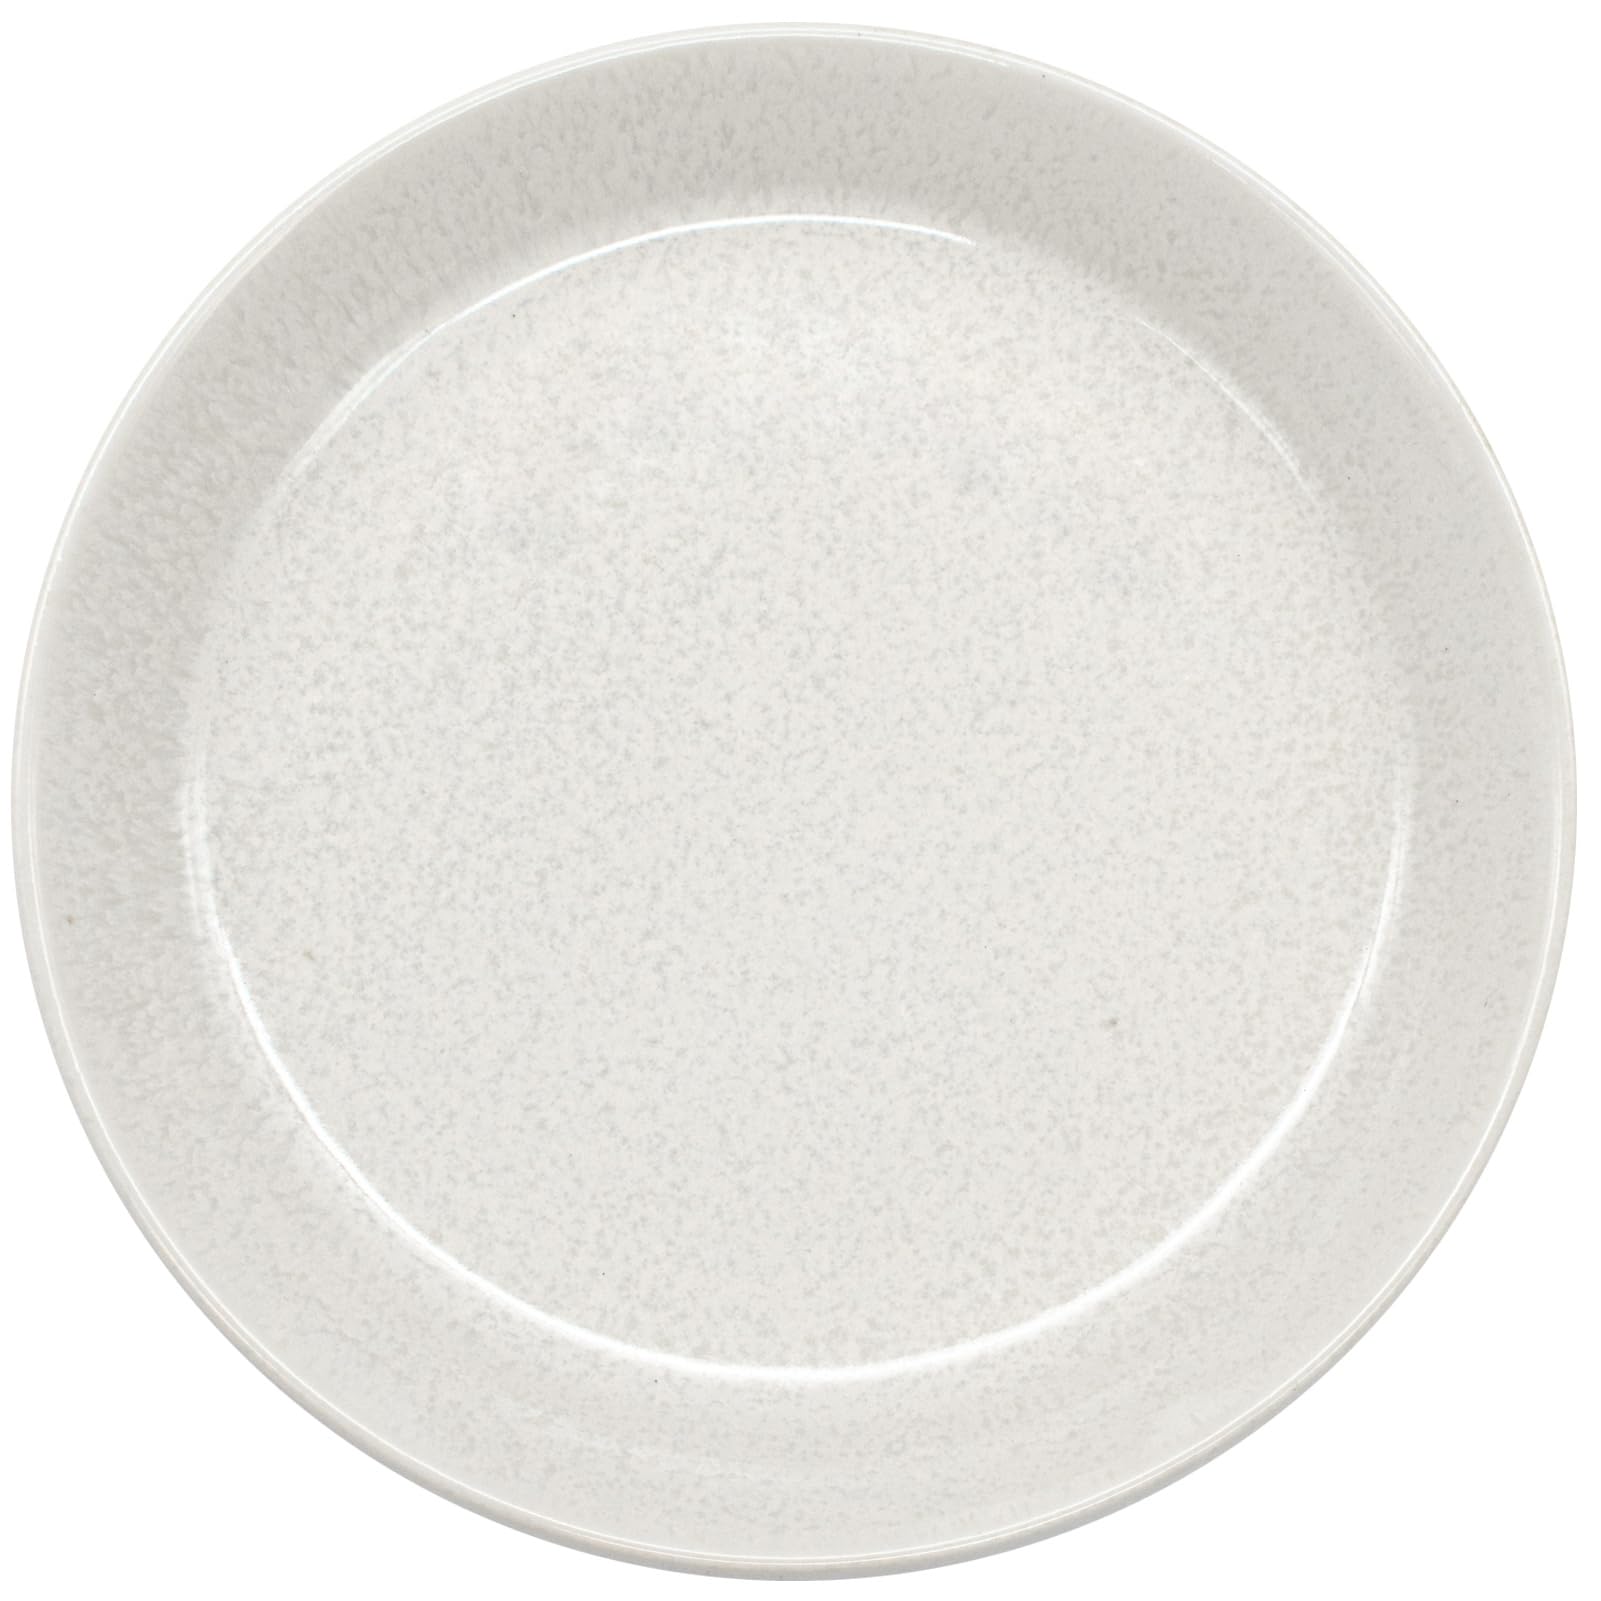 Aito Ivory White Plate 14cm Mino Ware Dishwasher/Microwave Safe Japan Tableware 517293